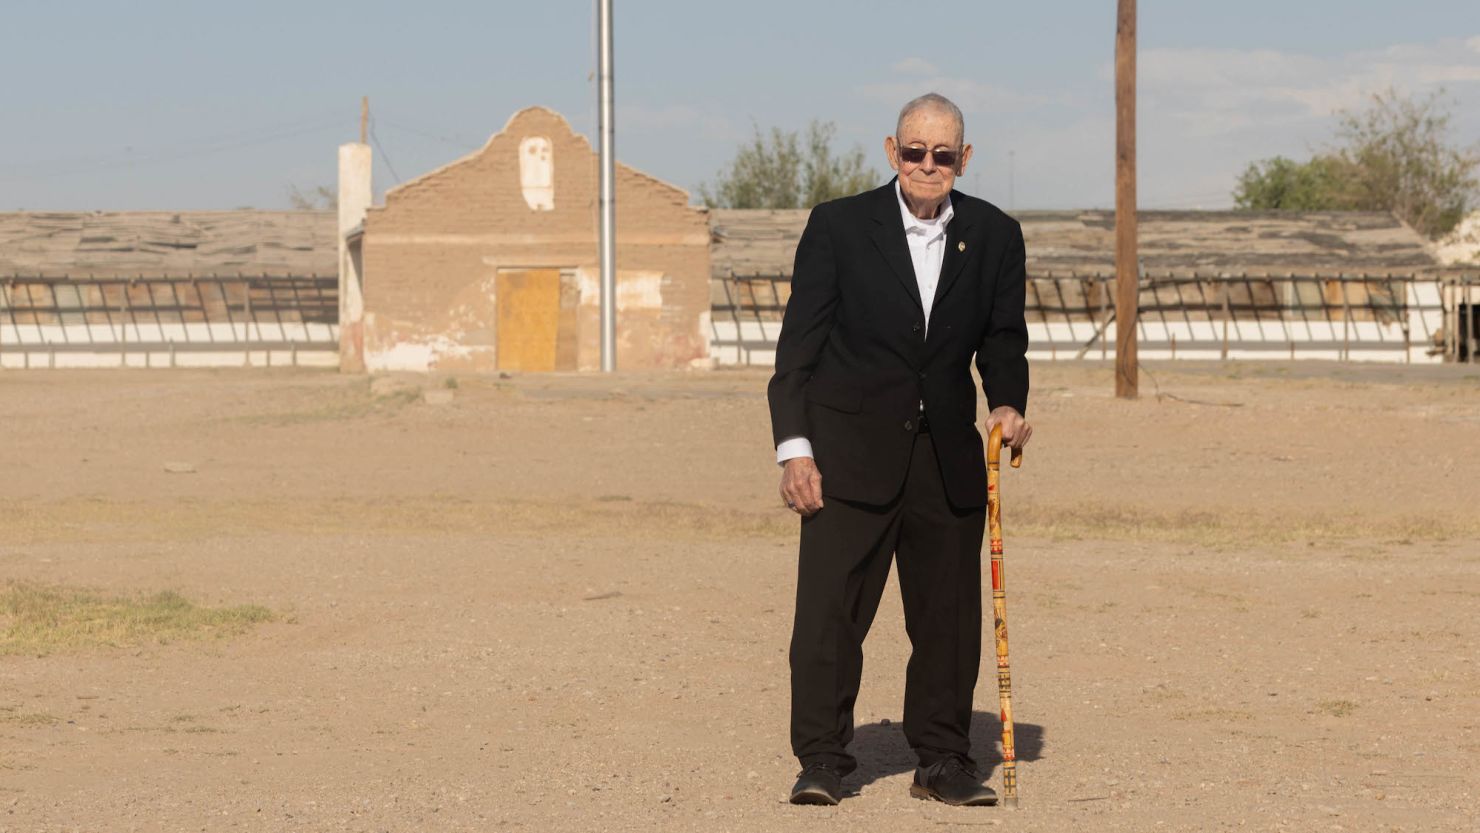 Sebastian Corral, 91, first stepped foot in the Rio Vista Bracero Reception Center in Socorro, Texas, more than 70 years ago. Recently he returned as a guest of honor after the site was designated a National Historic Landmark.